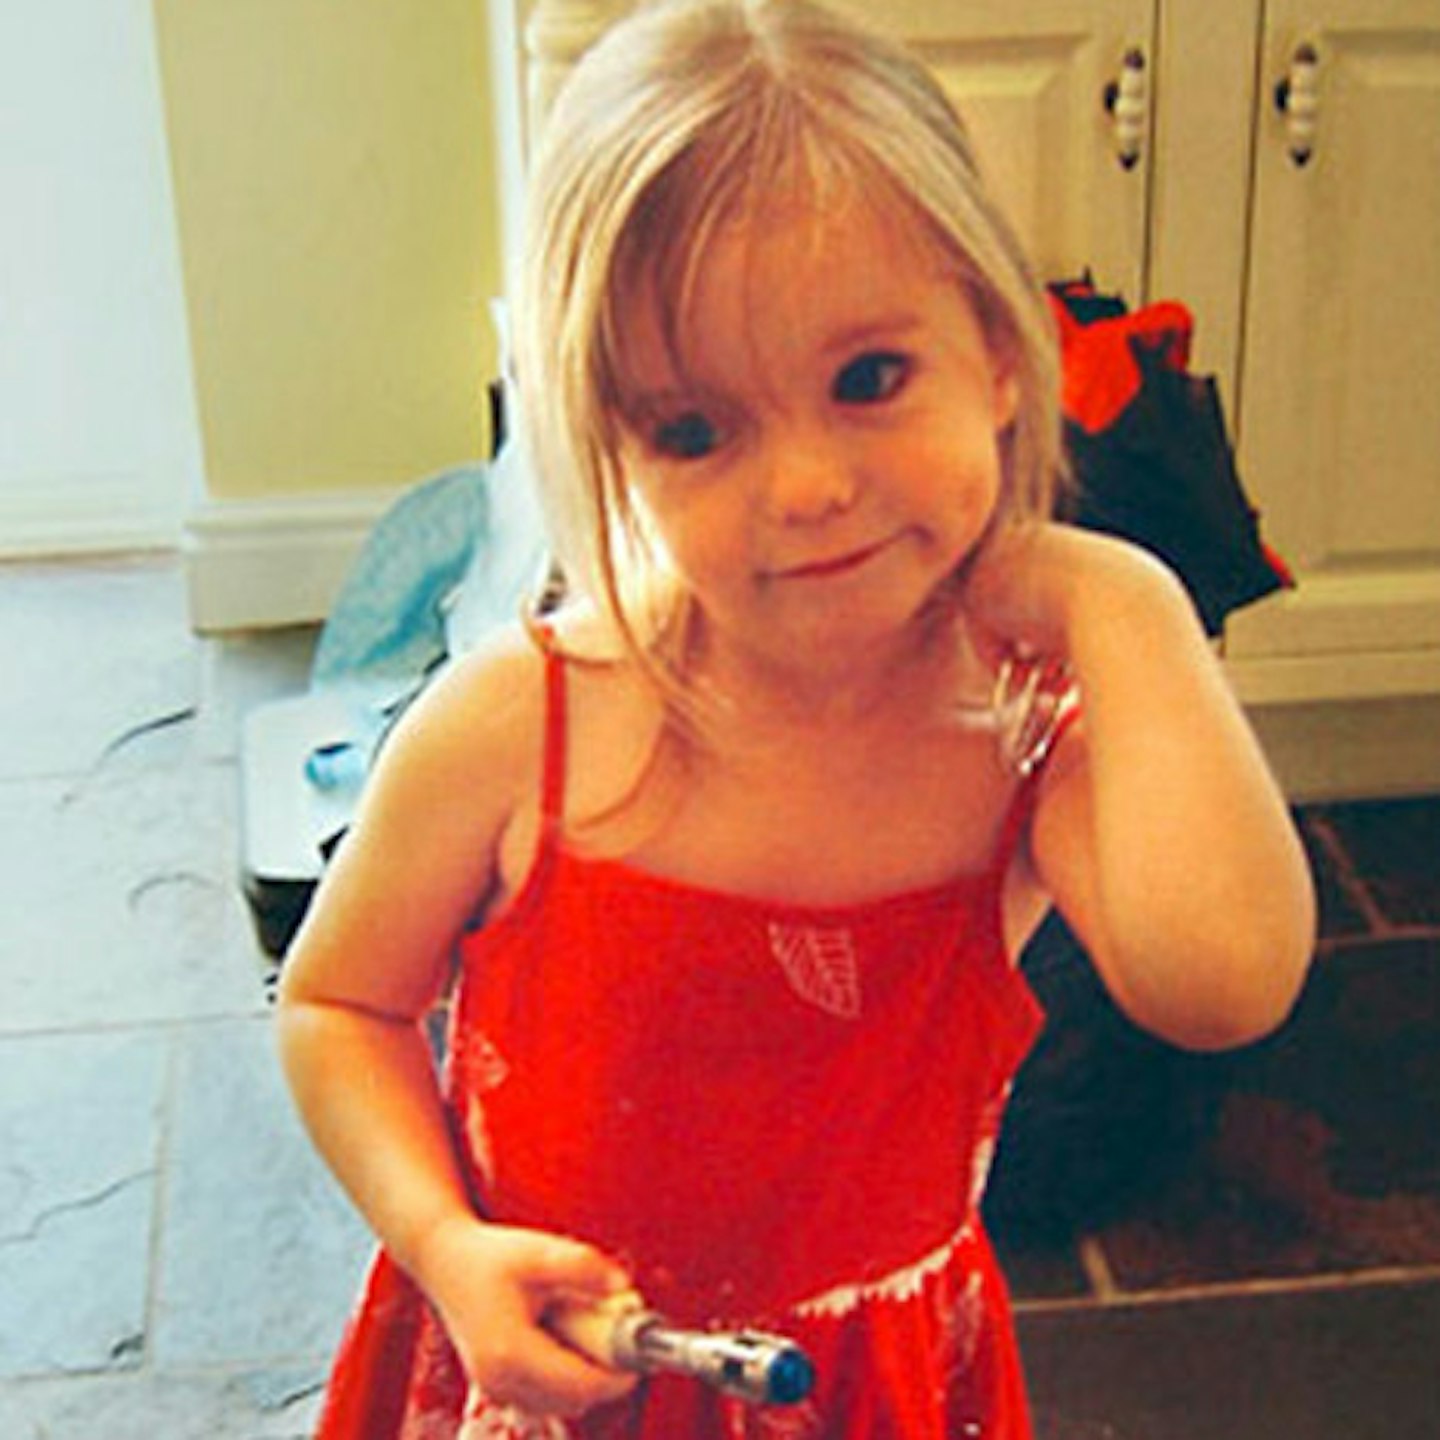 Madeleine McCann was just three years old when she vanished from a holiday apartment in Portugal